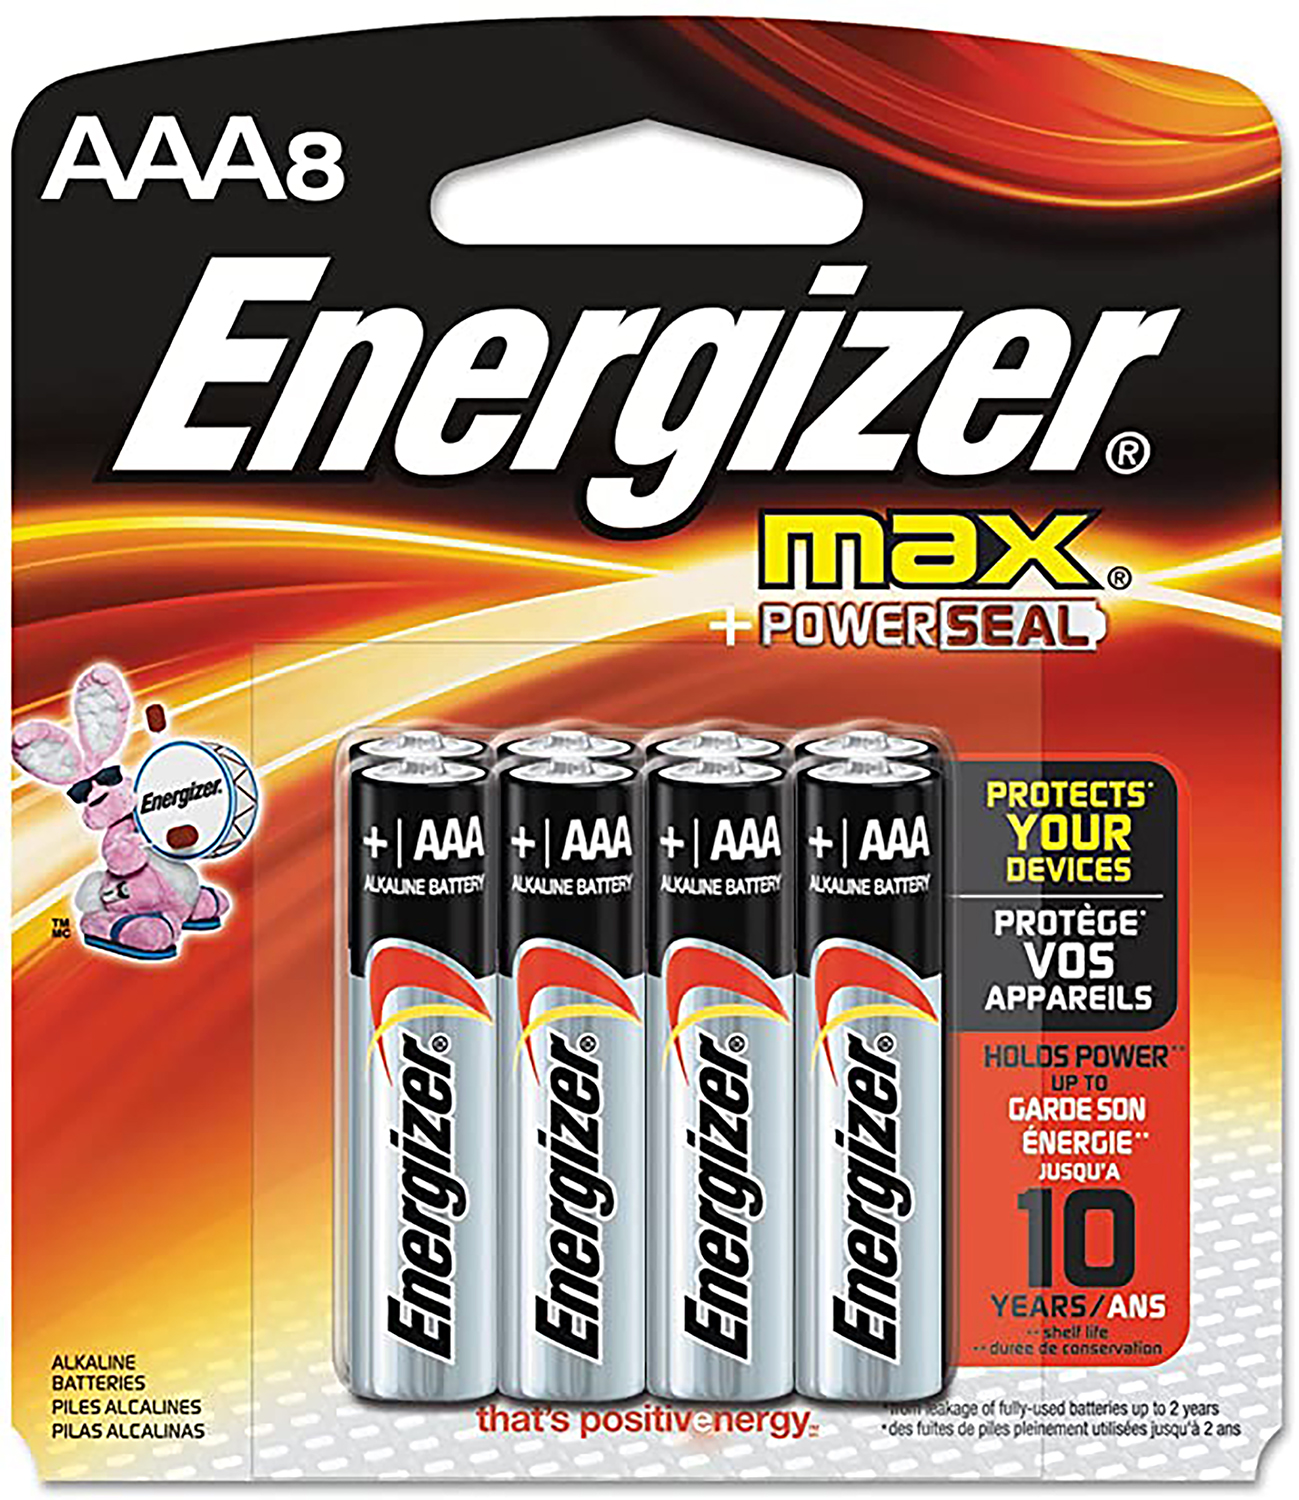 ENERGIZER MAX BATTERIES AAA 8-PACK